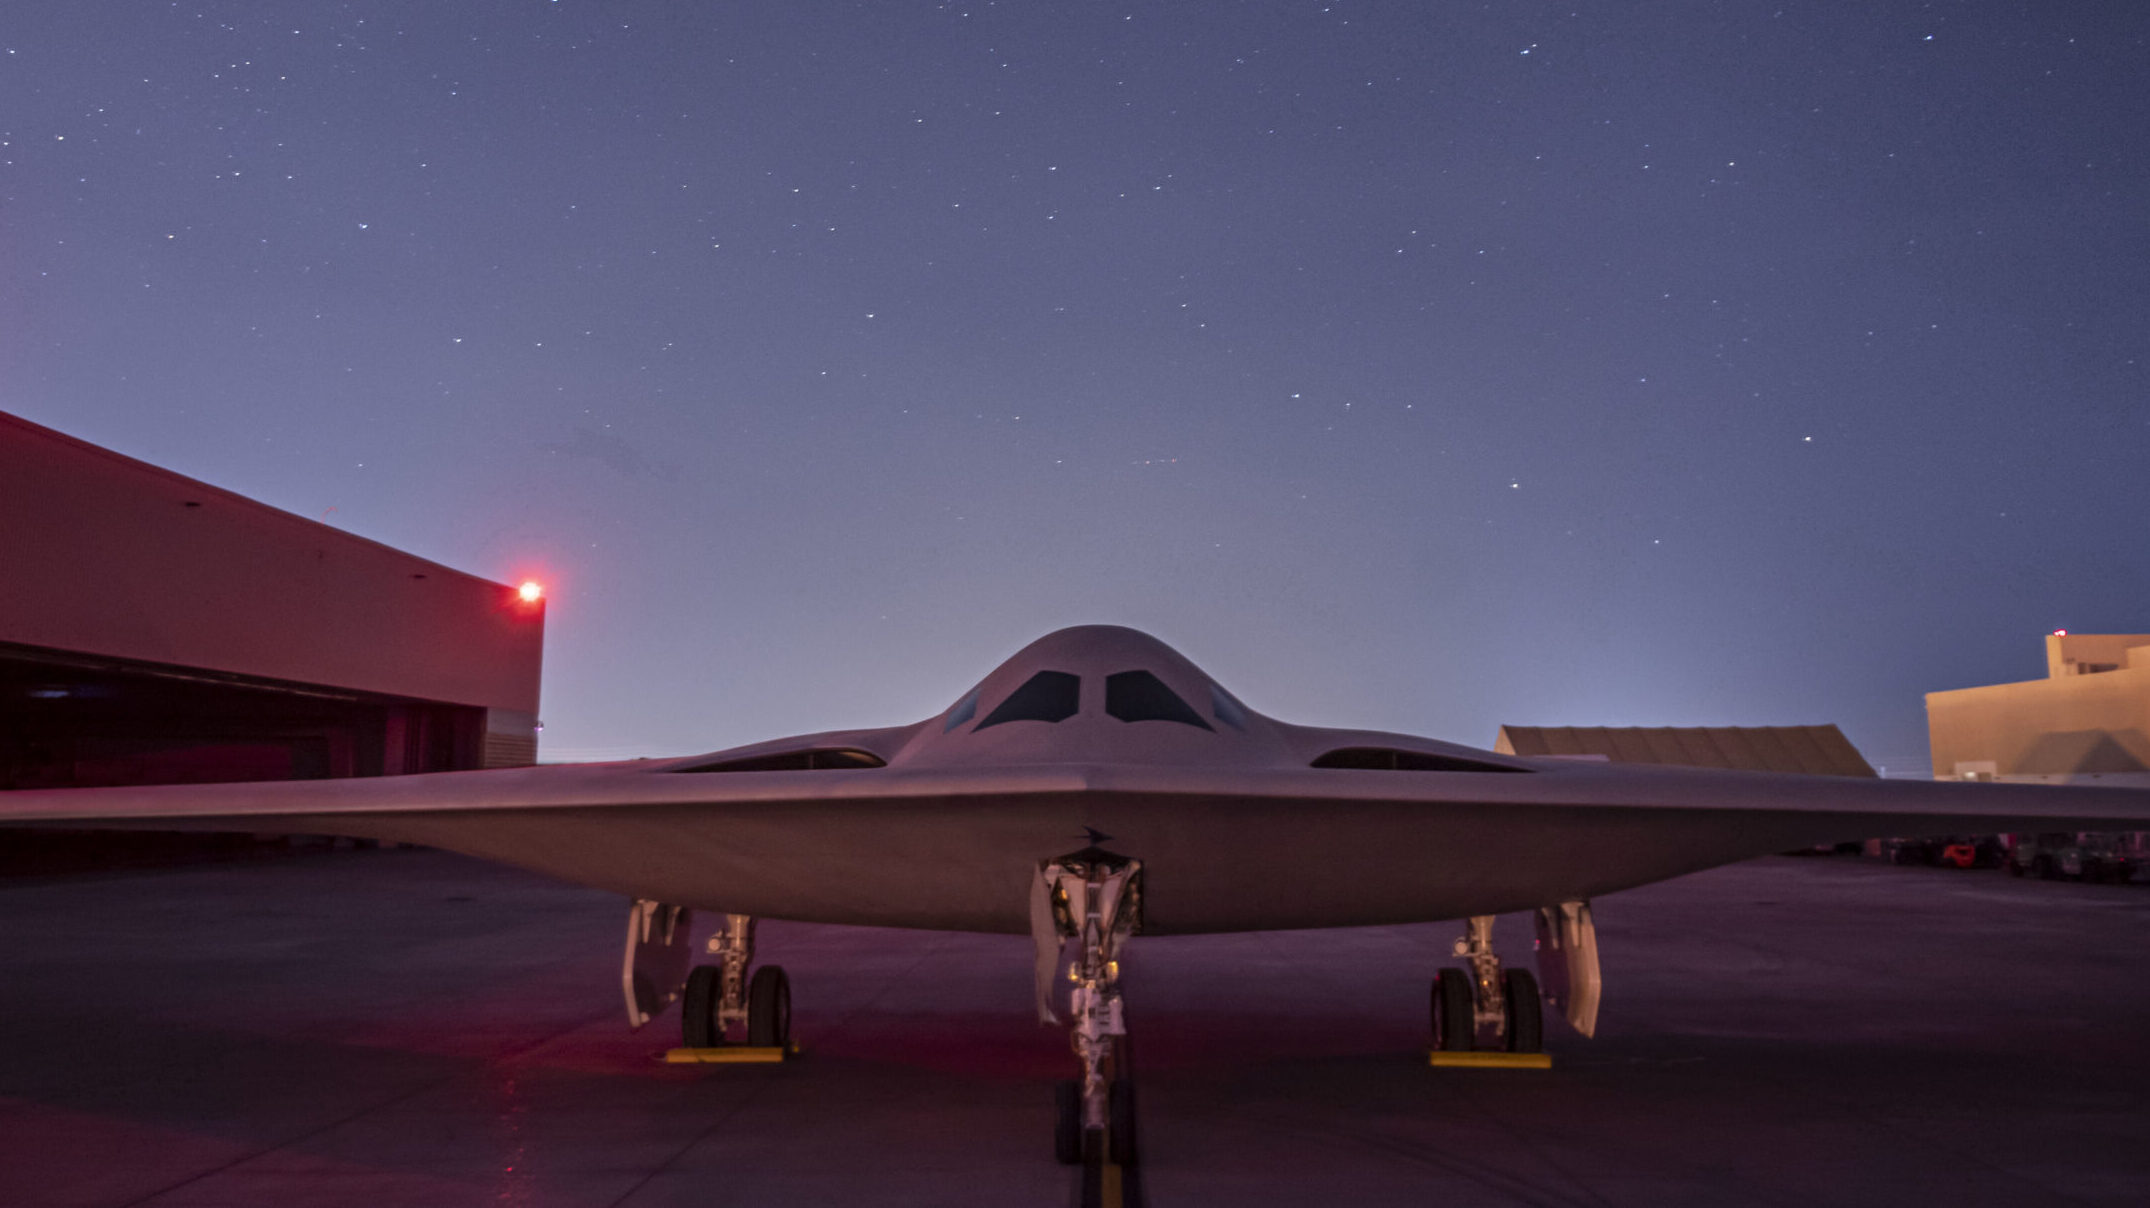 US Air Force asks for 72 fighters in 2024, and it might happen again